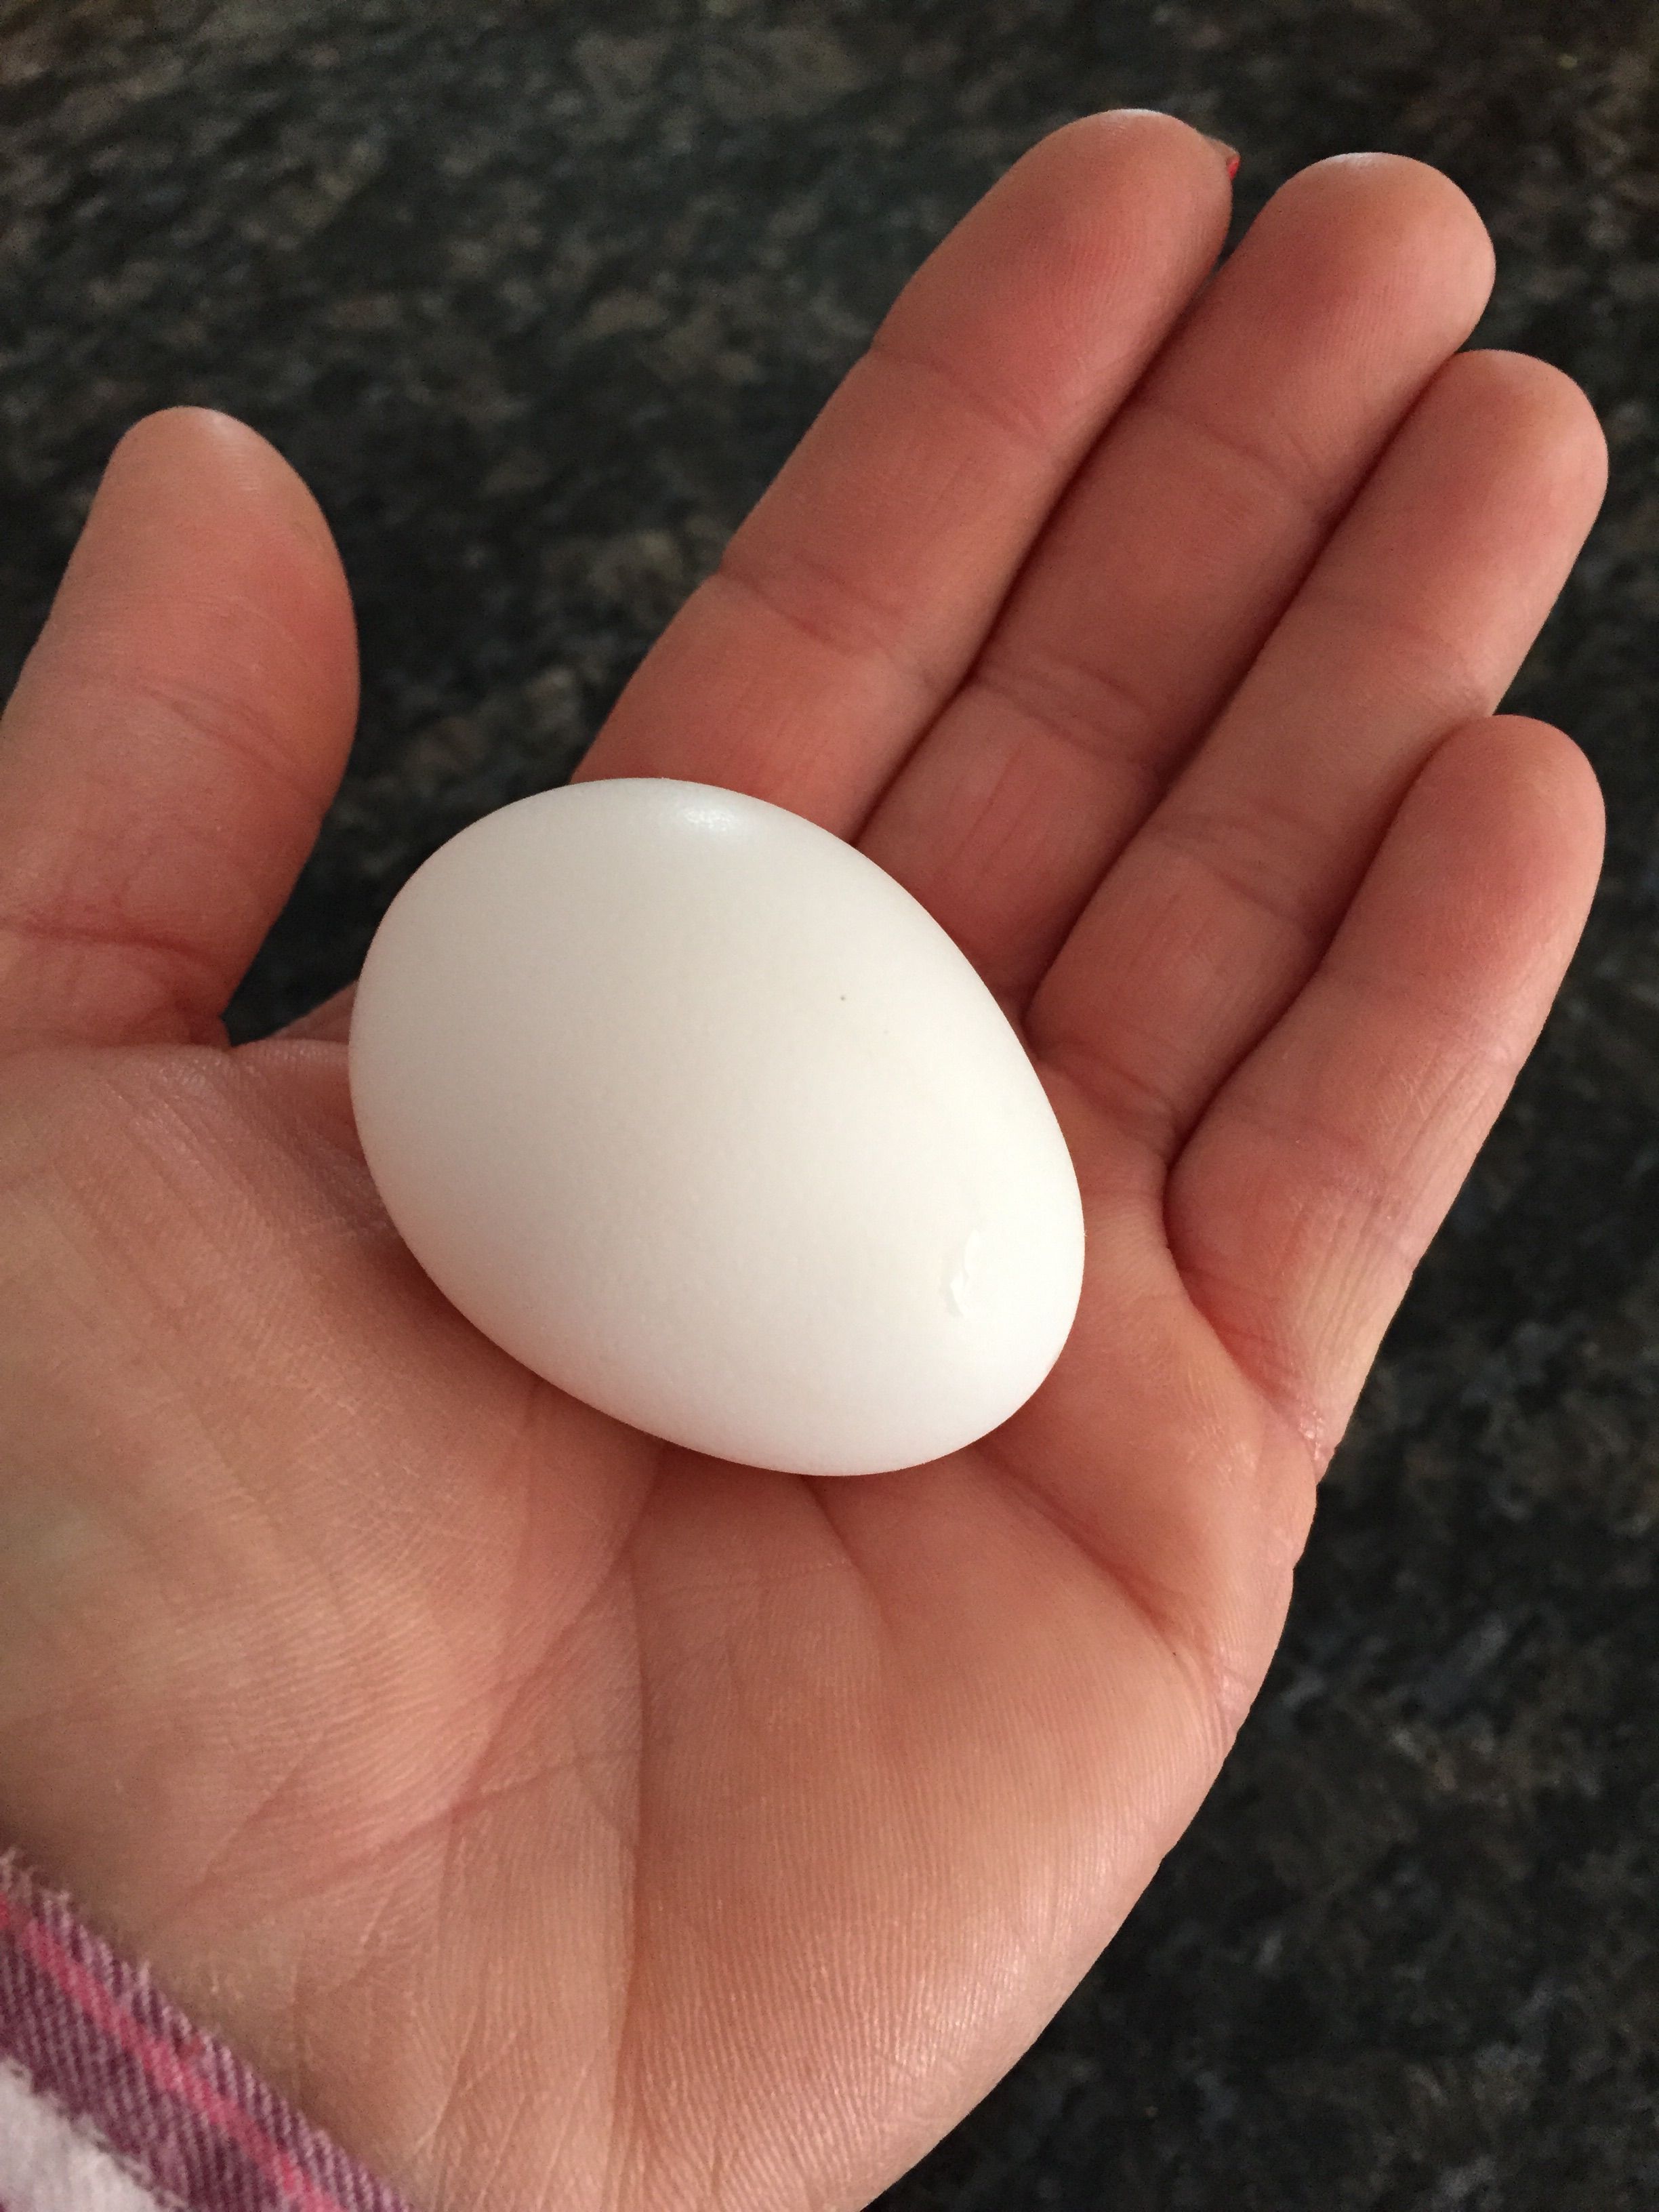 First egg from Betty. Yay!